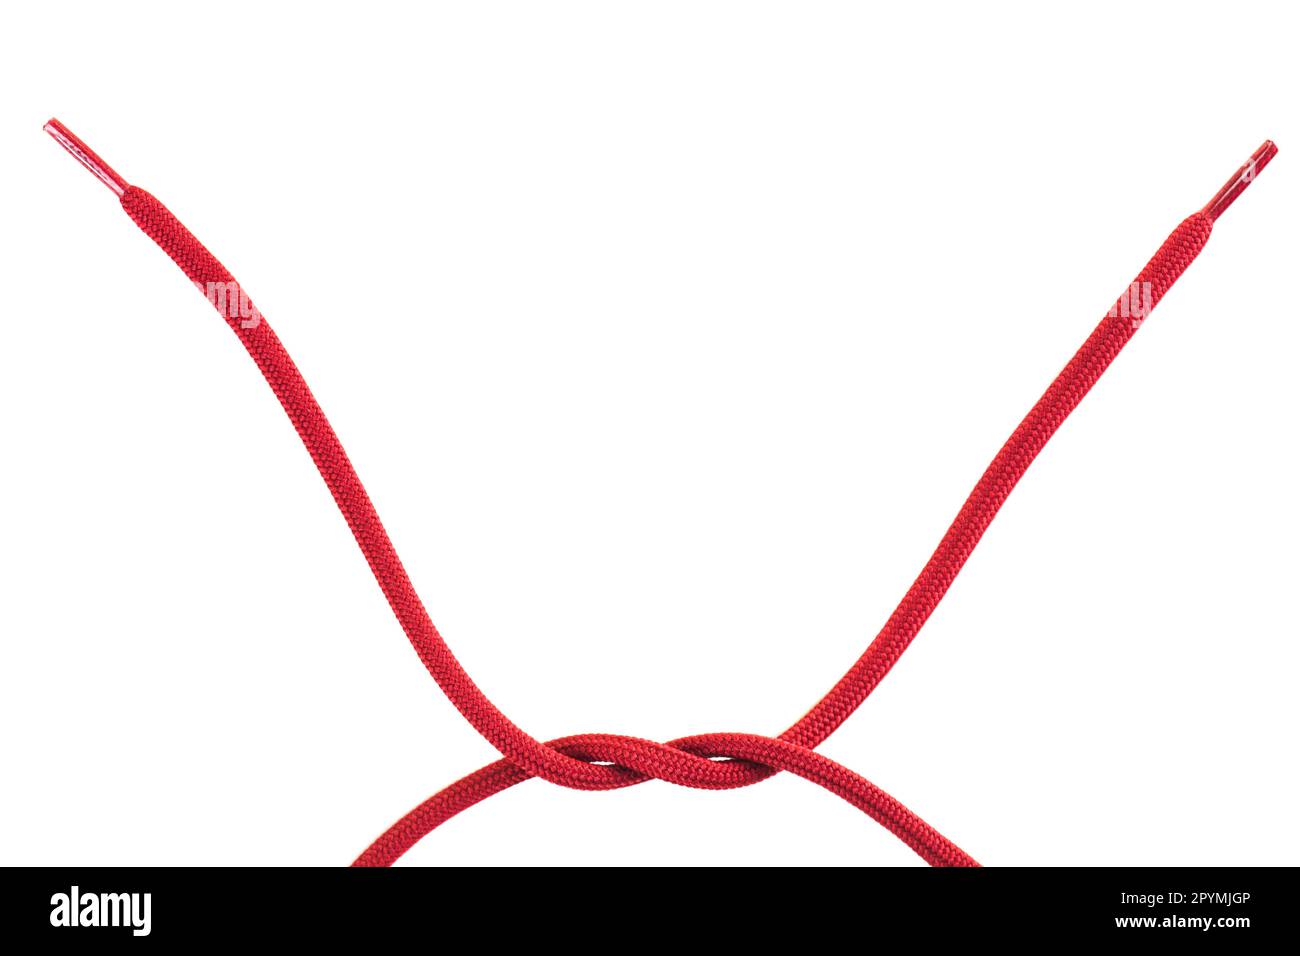 red shoe laces with a knot against white background Stock Photo - Alamy